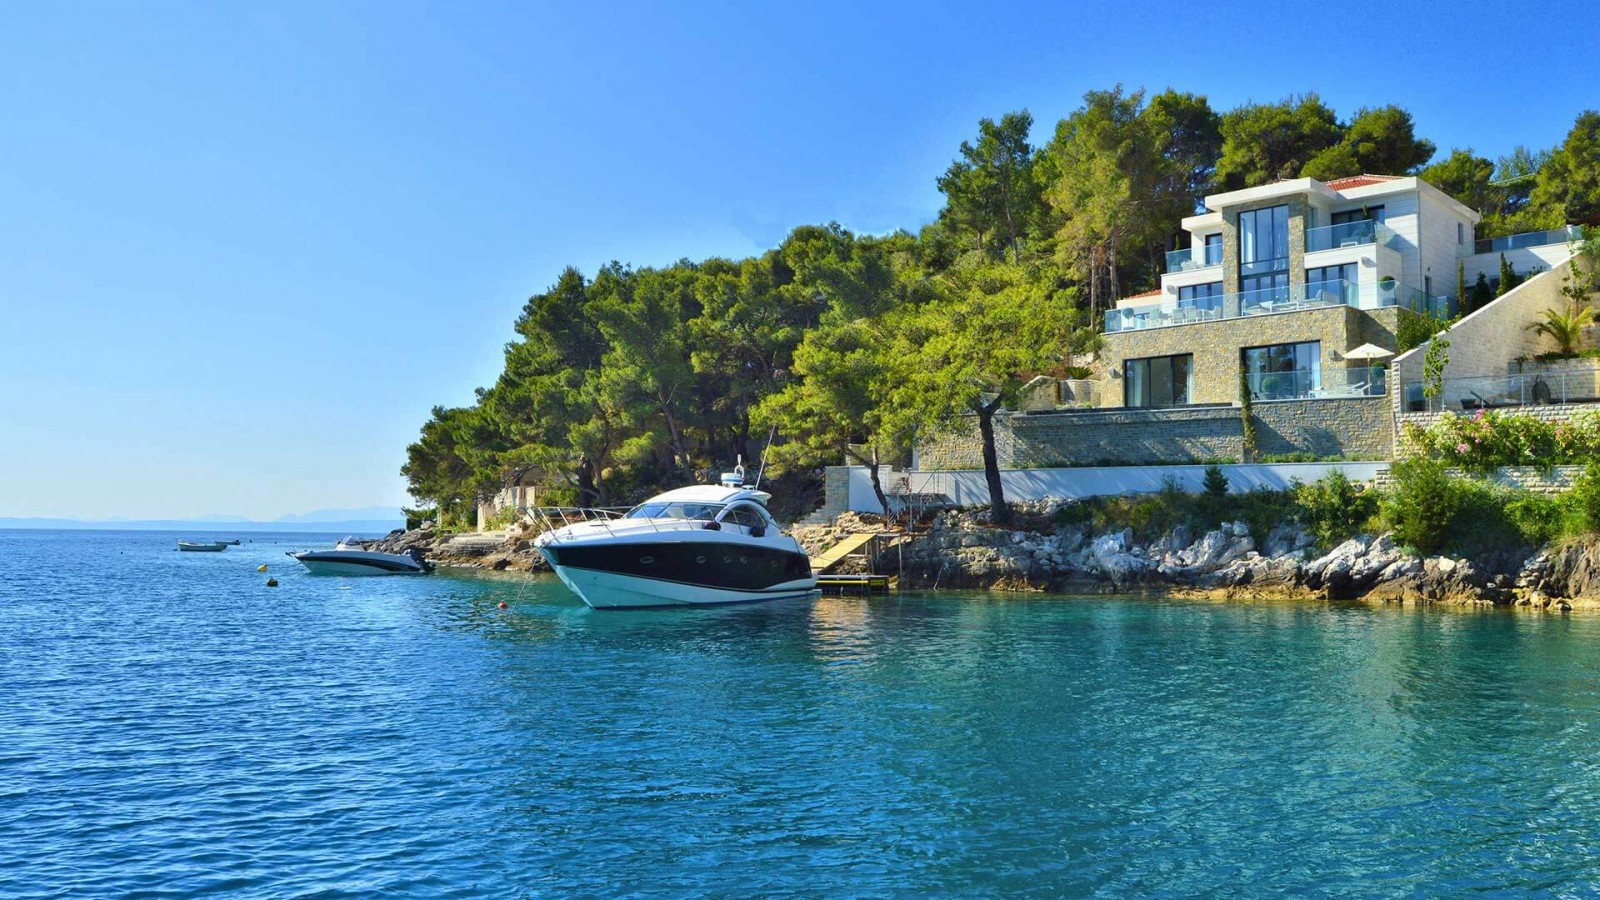 The best place for a luxury vacation in Dalmatia